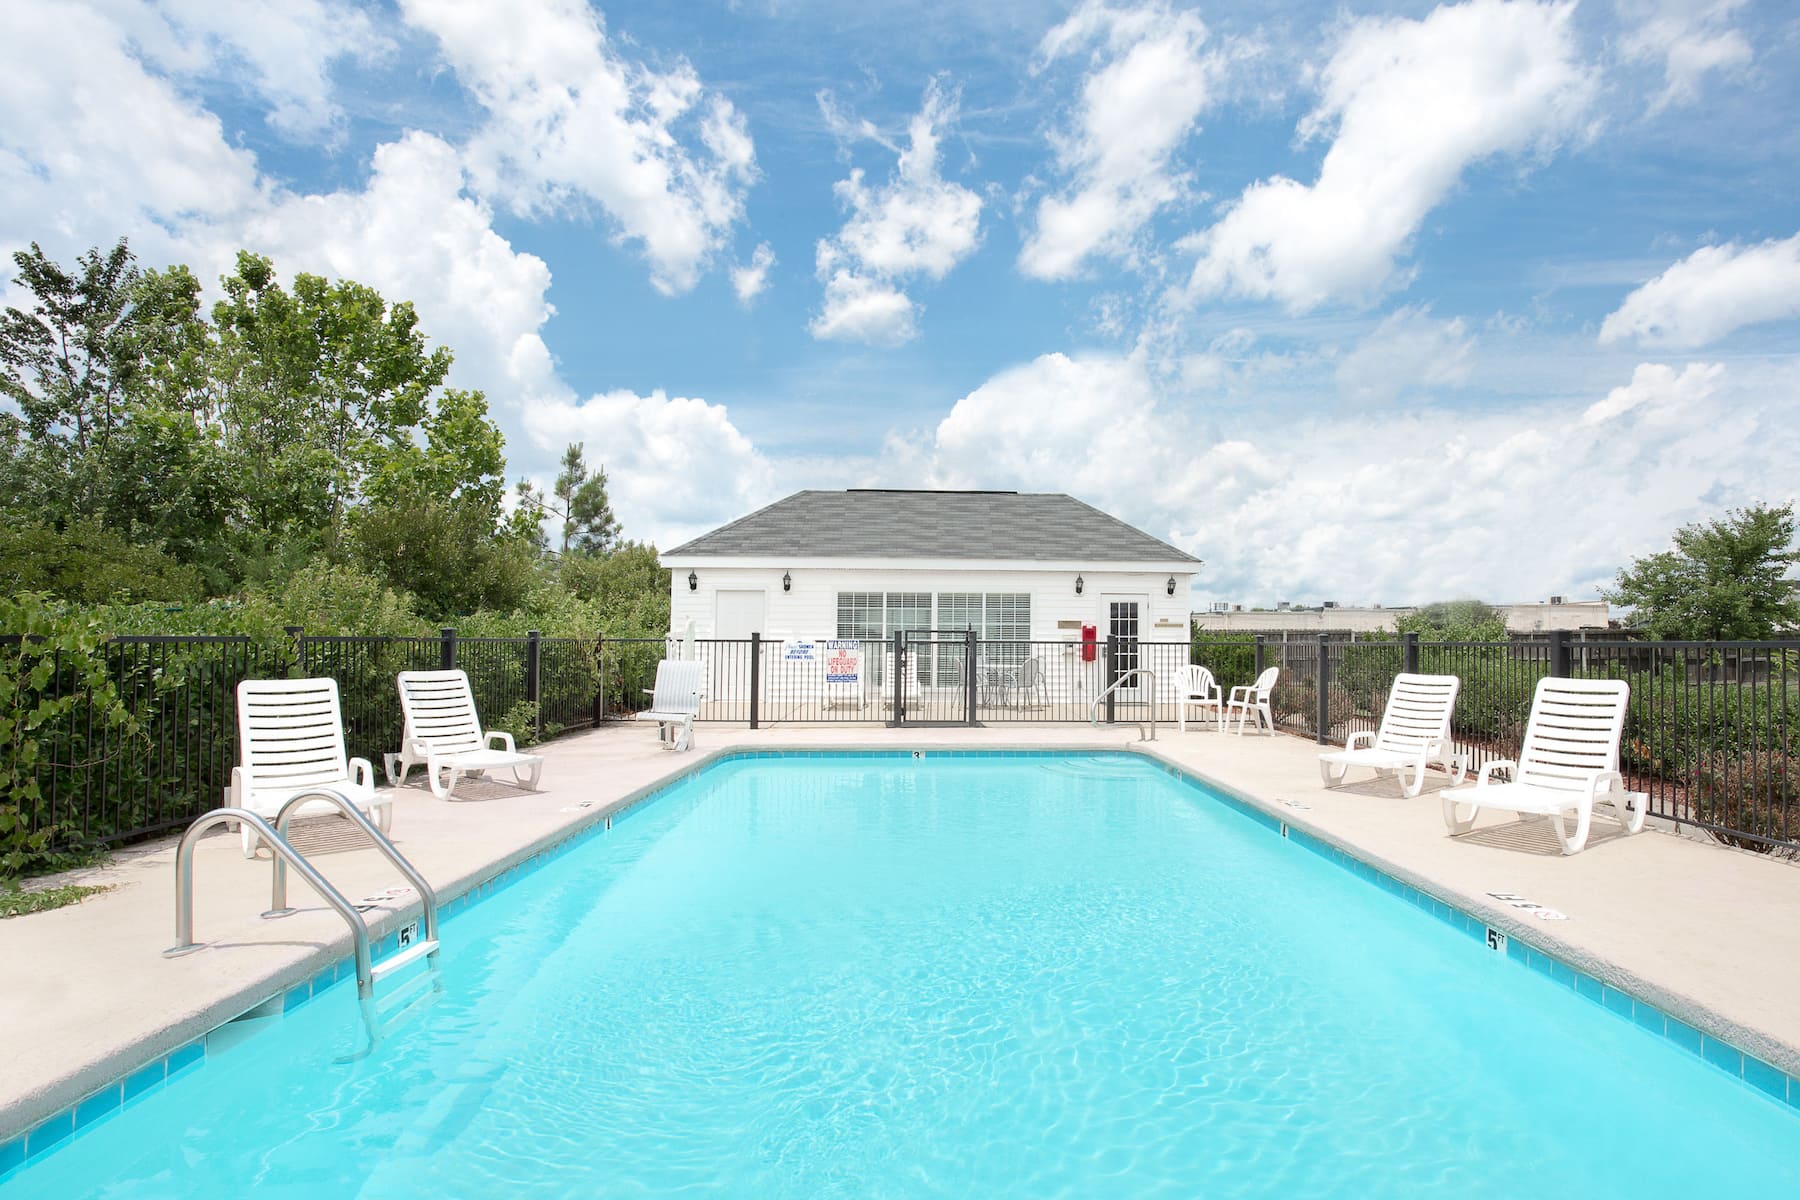 Pool at the Baymont by Wyndham Roanoke Rapids in Roanoke Rapids, North Caro...